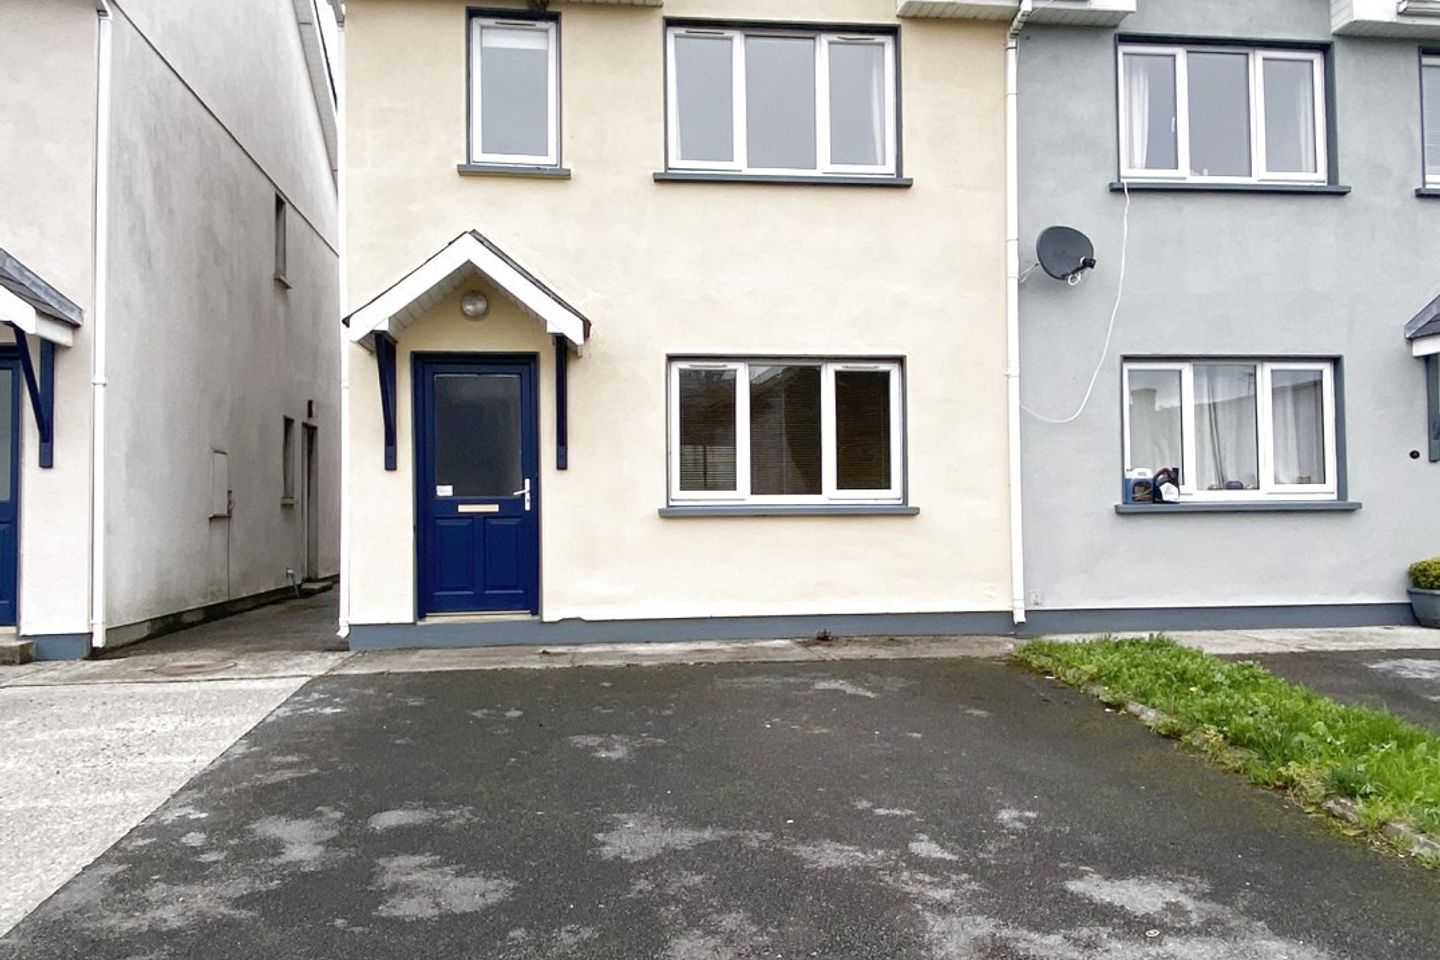 3 Abbey Court, Fethard, Co. Tipperary